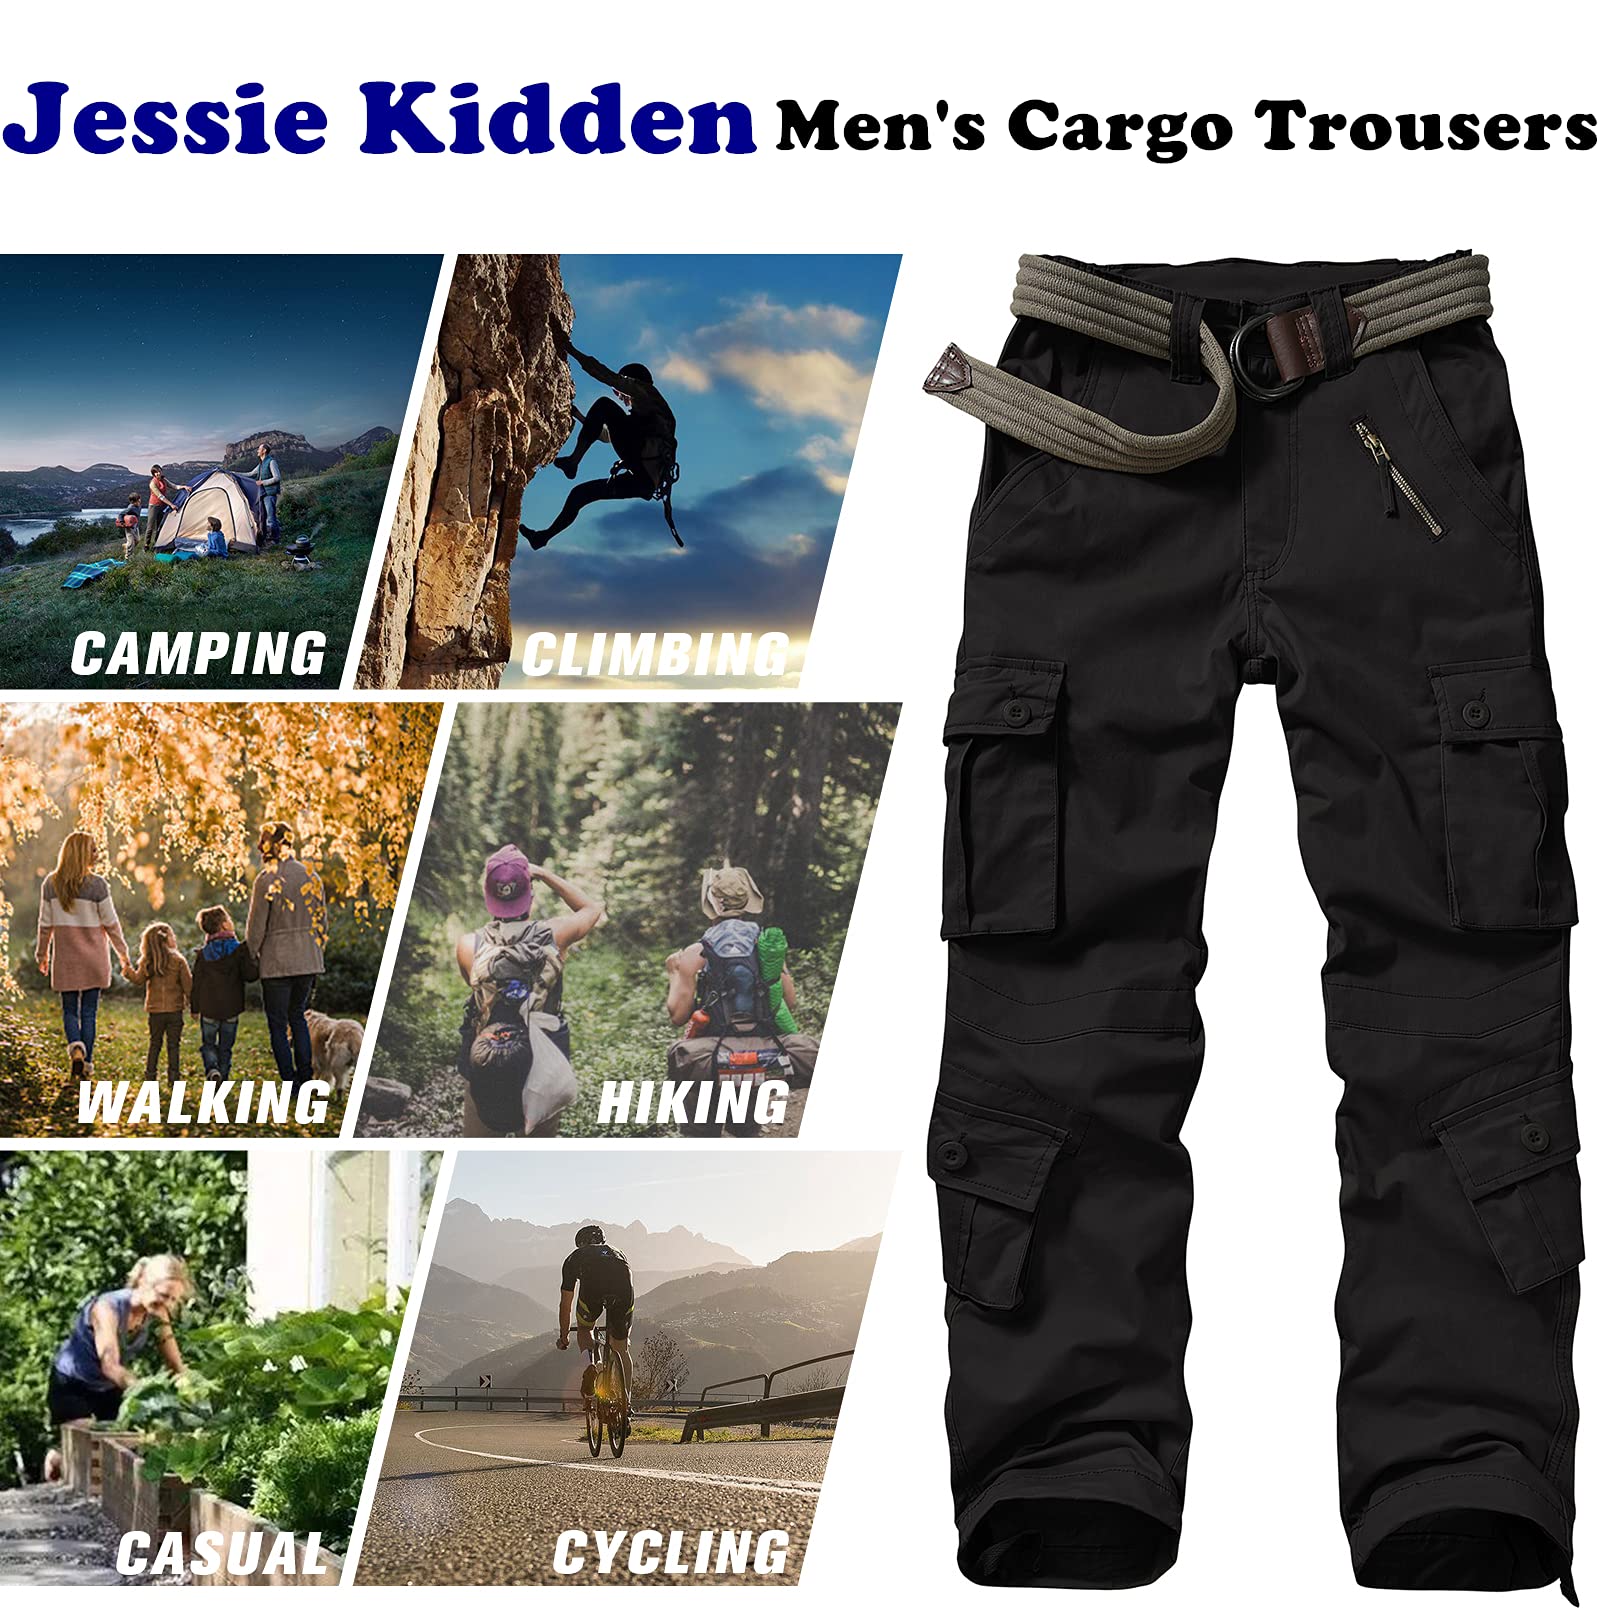 Jessie Kidden Mens Combat Camo Cargo Trousers Camouflage Army Military Tactical Work Pants 